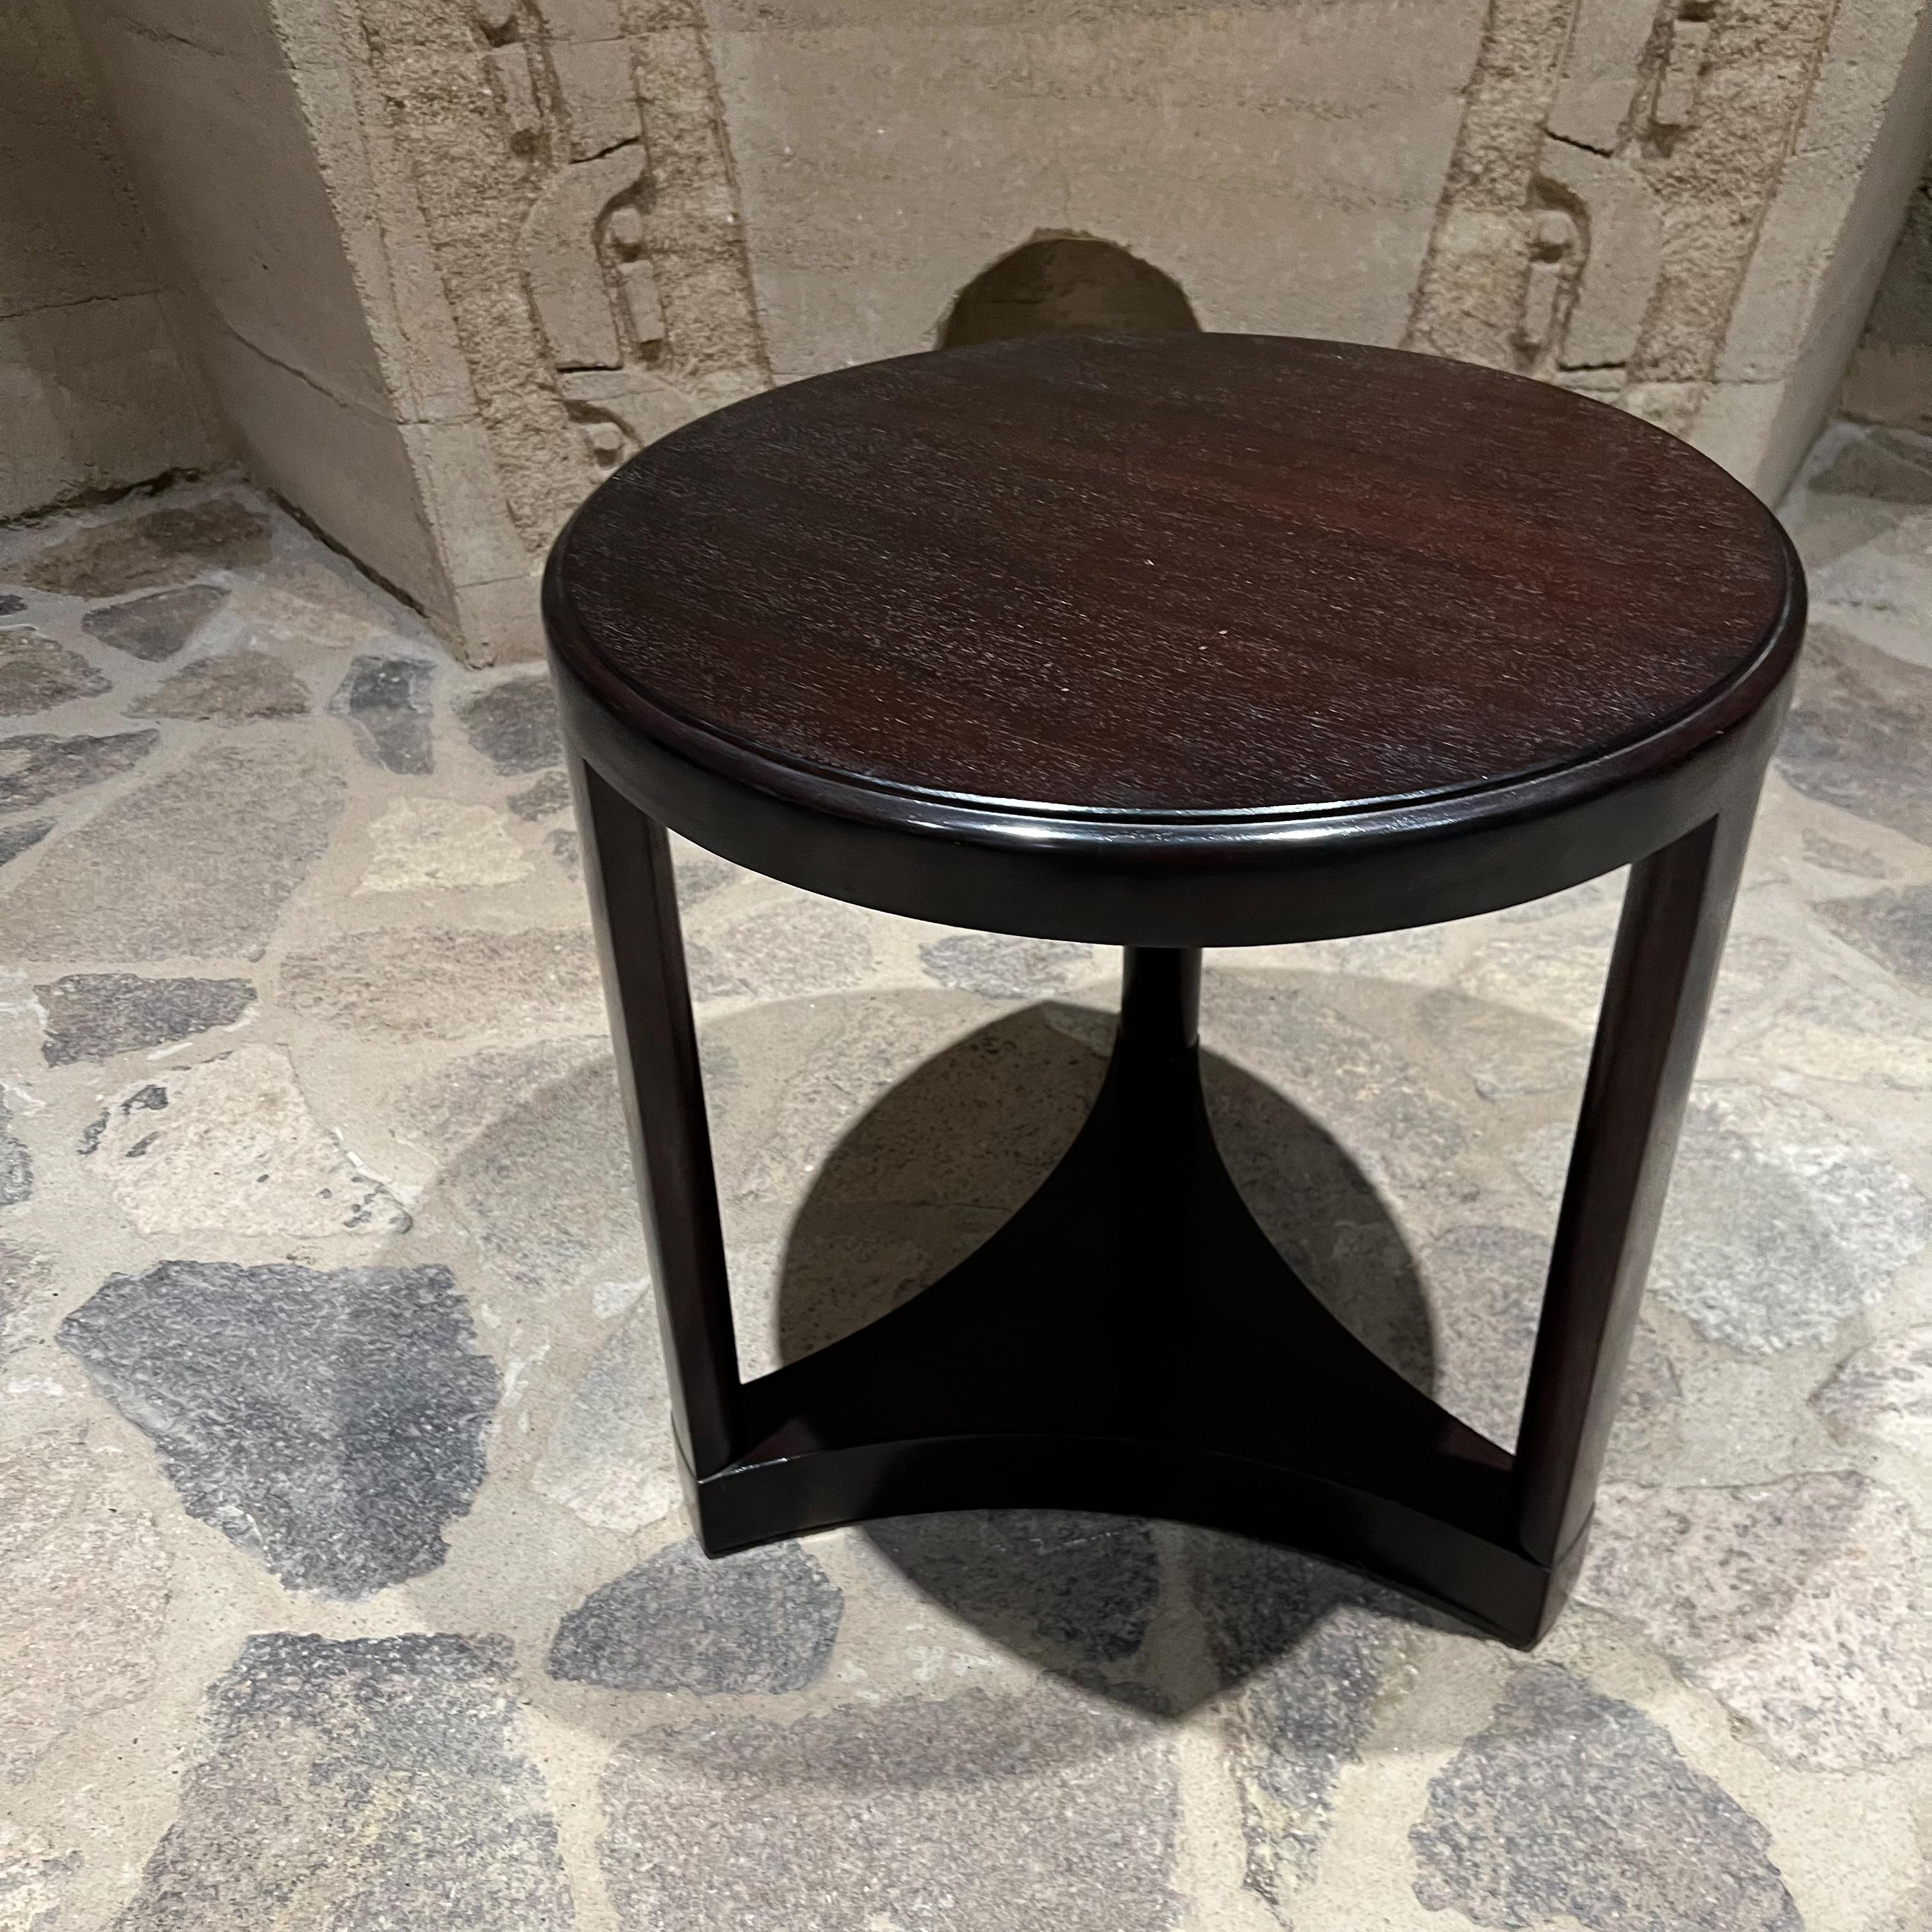 Side Table
From DUNBAR Edward Wormley design Berne Indiana
Round side table restored in rich dark brown. Original paper label present.
21.25 tall x 21 in diameter
Preowned condition original vintage restored.
Refer to images provided.

